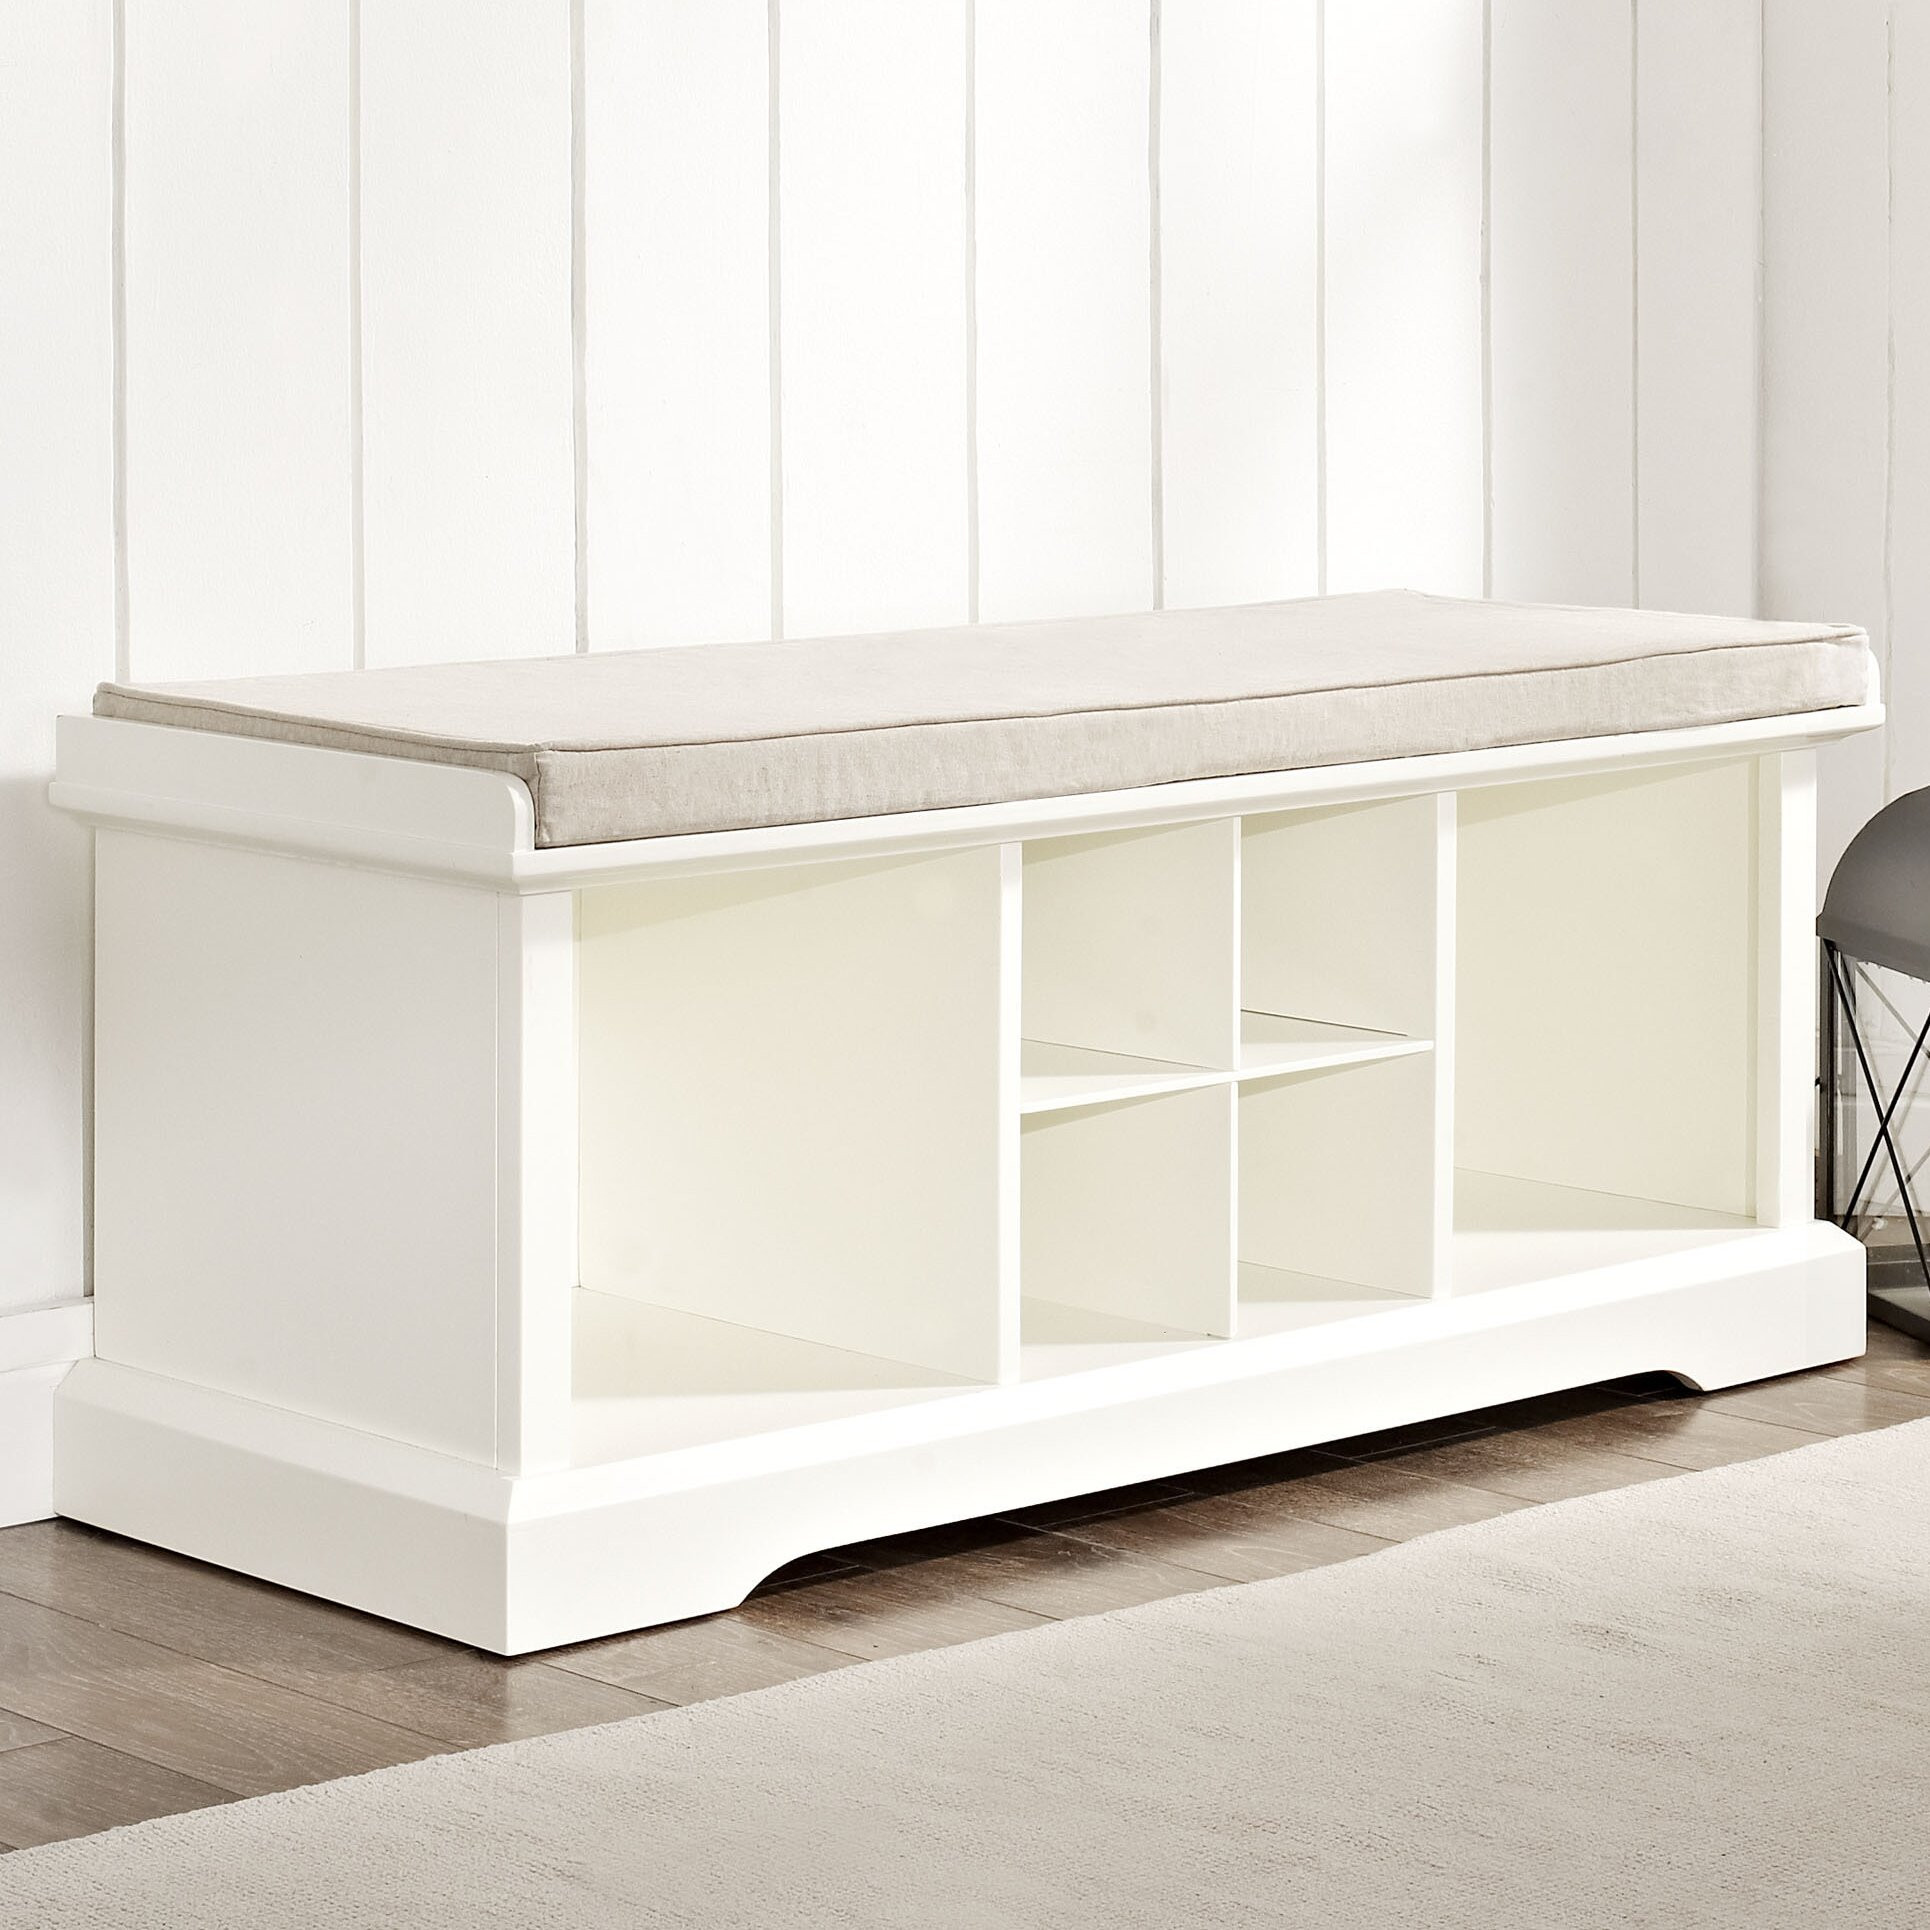 Entry Way Storage Bench
 Breakwater Bay Selbyville Storage Entryway Bench & Reviews